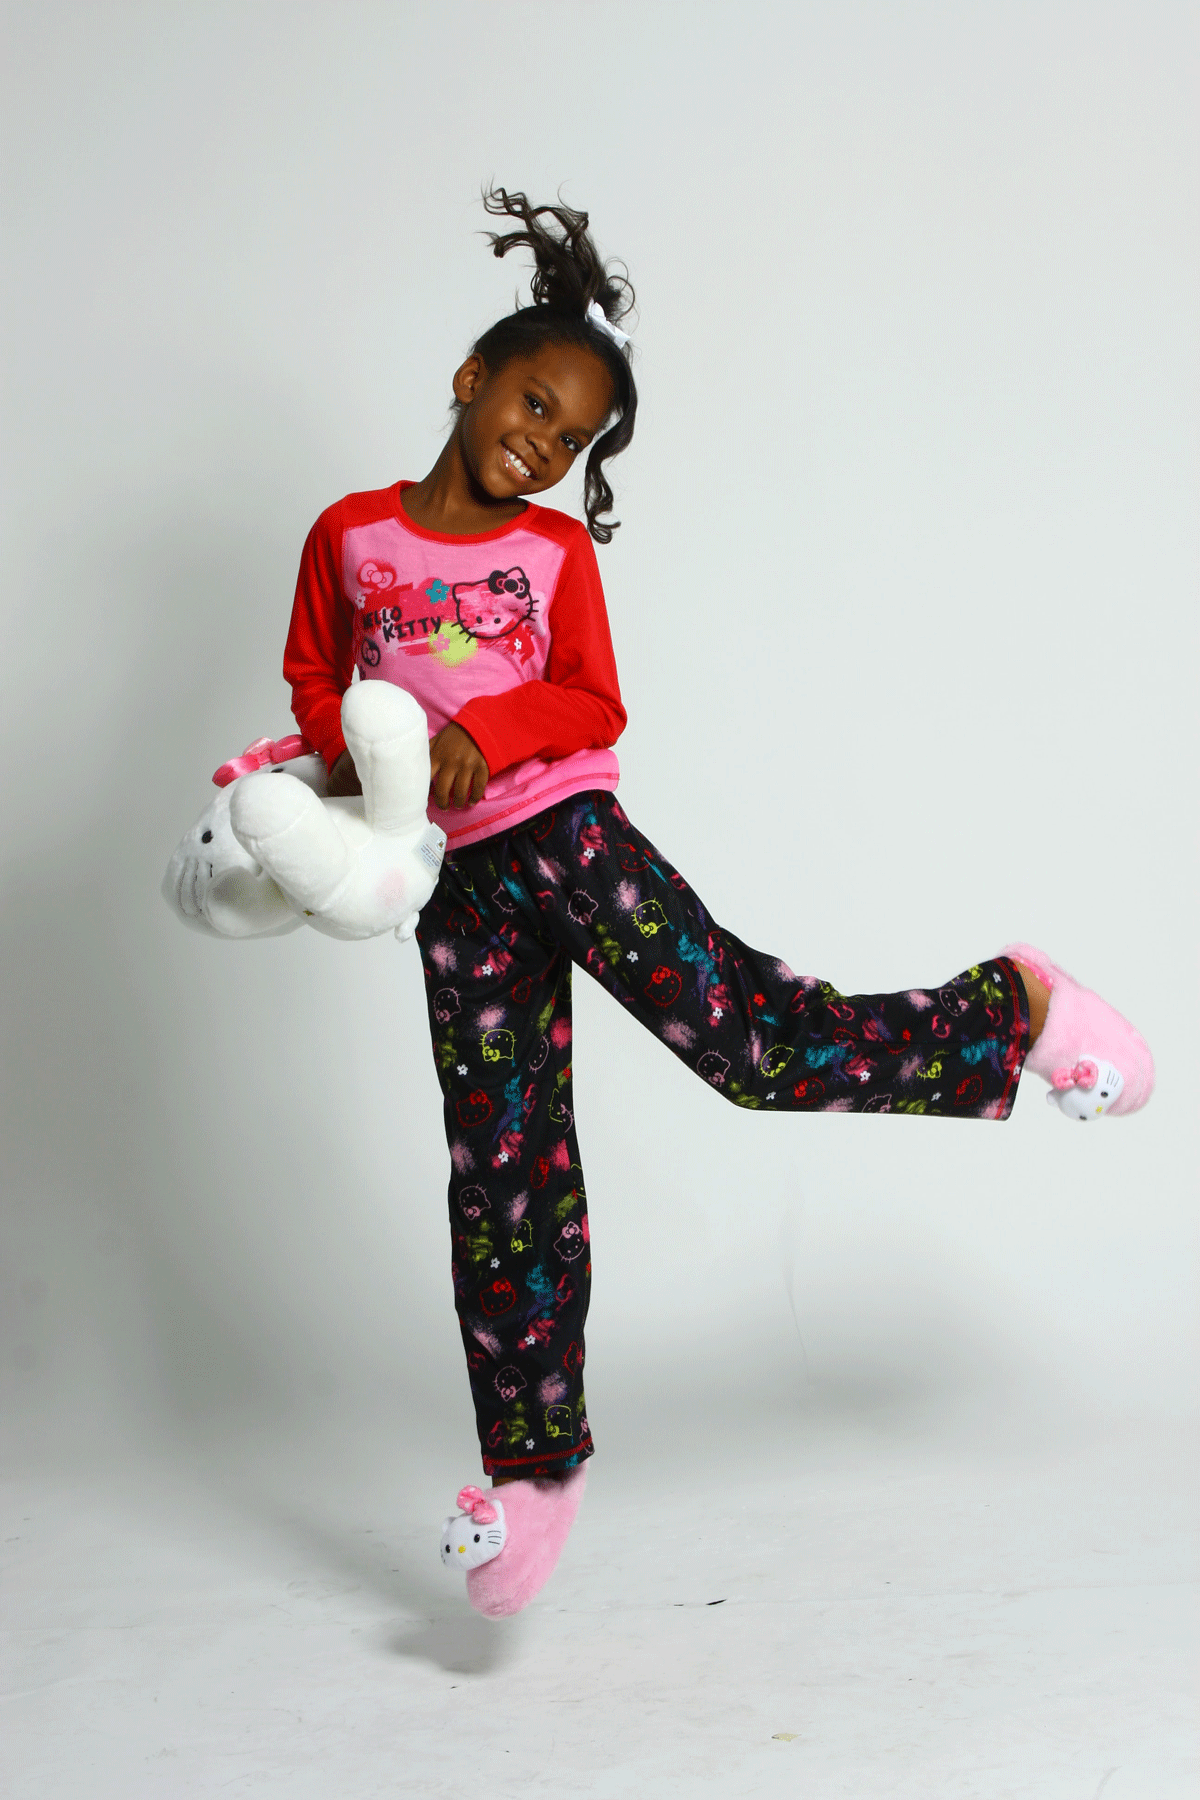 A little girl dressed in pink pajamas does a happy dance with her stuffed animal during a sleepover